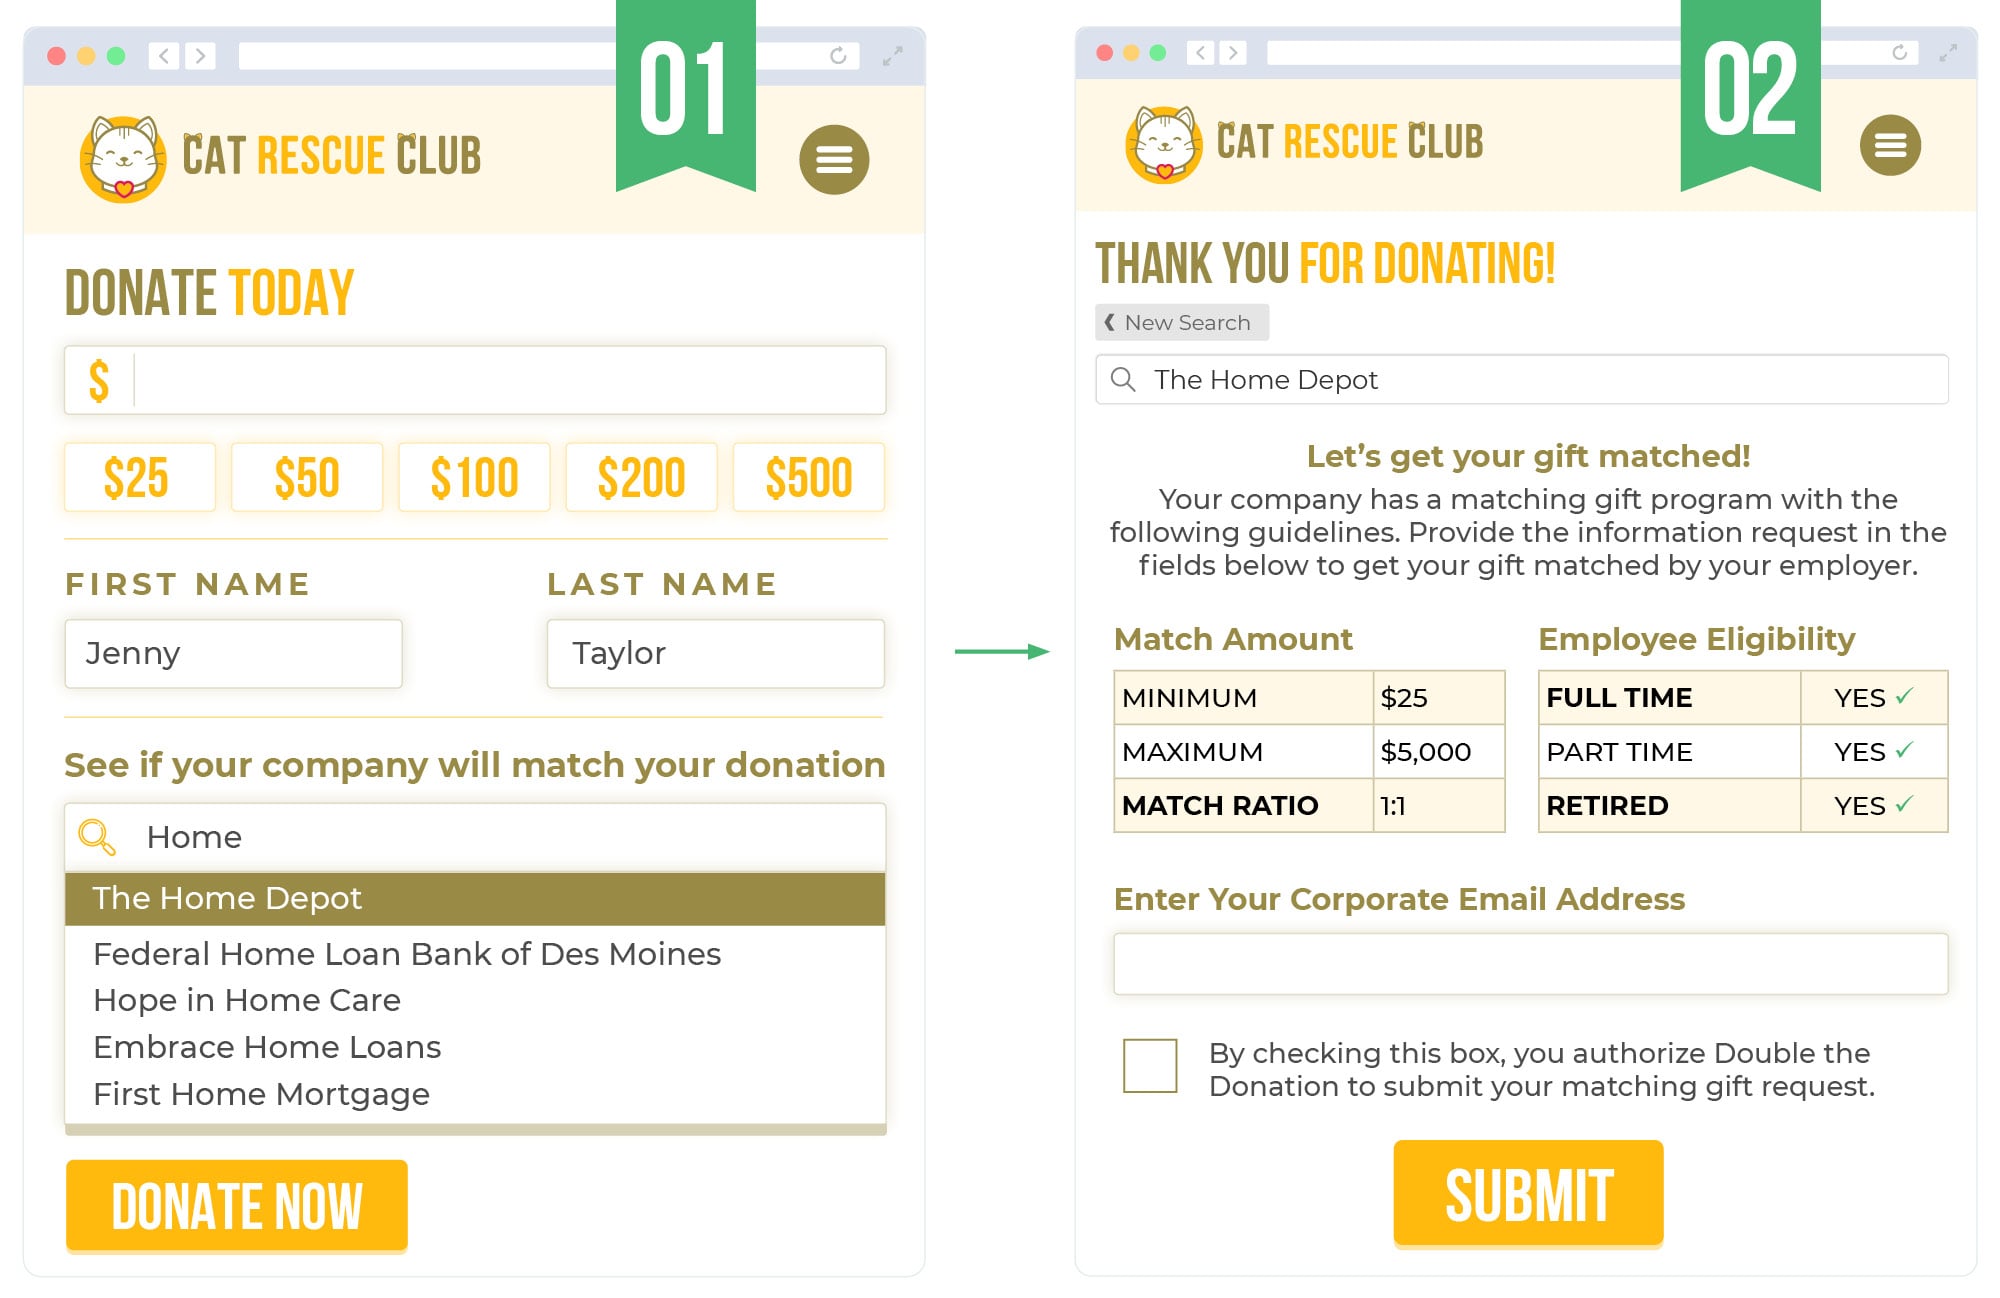 Auto-submission and matching gift form e-sign process